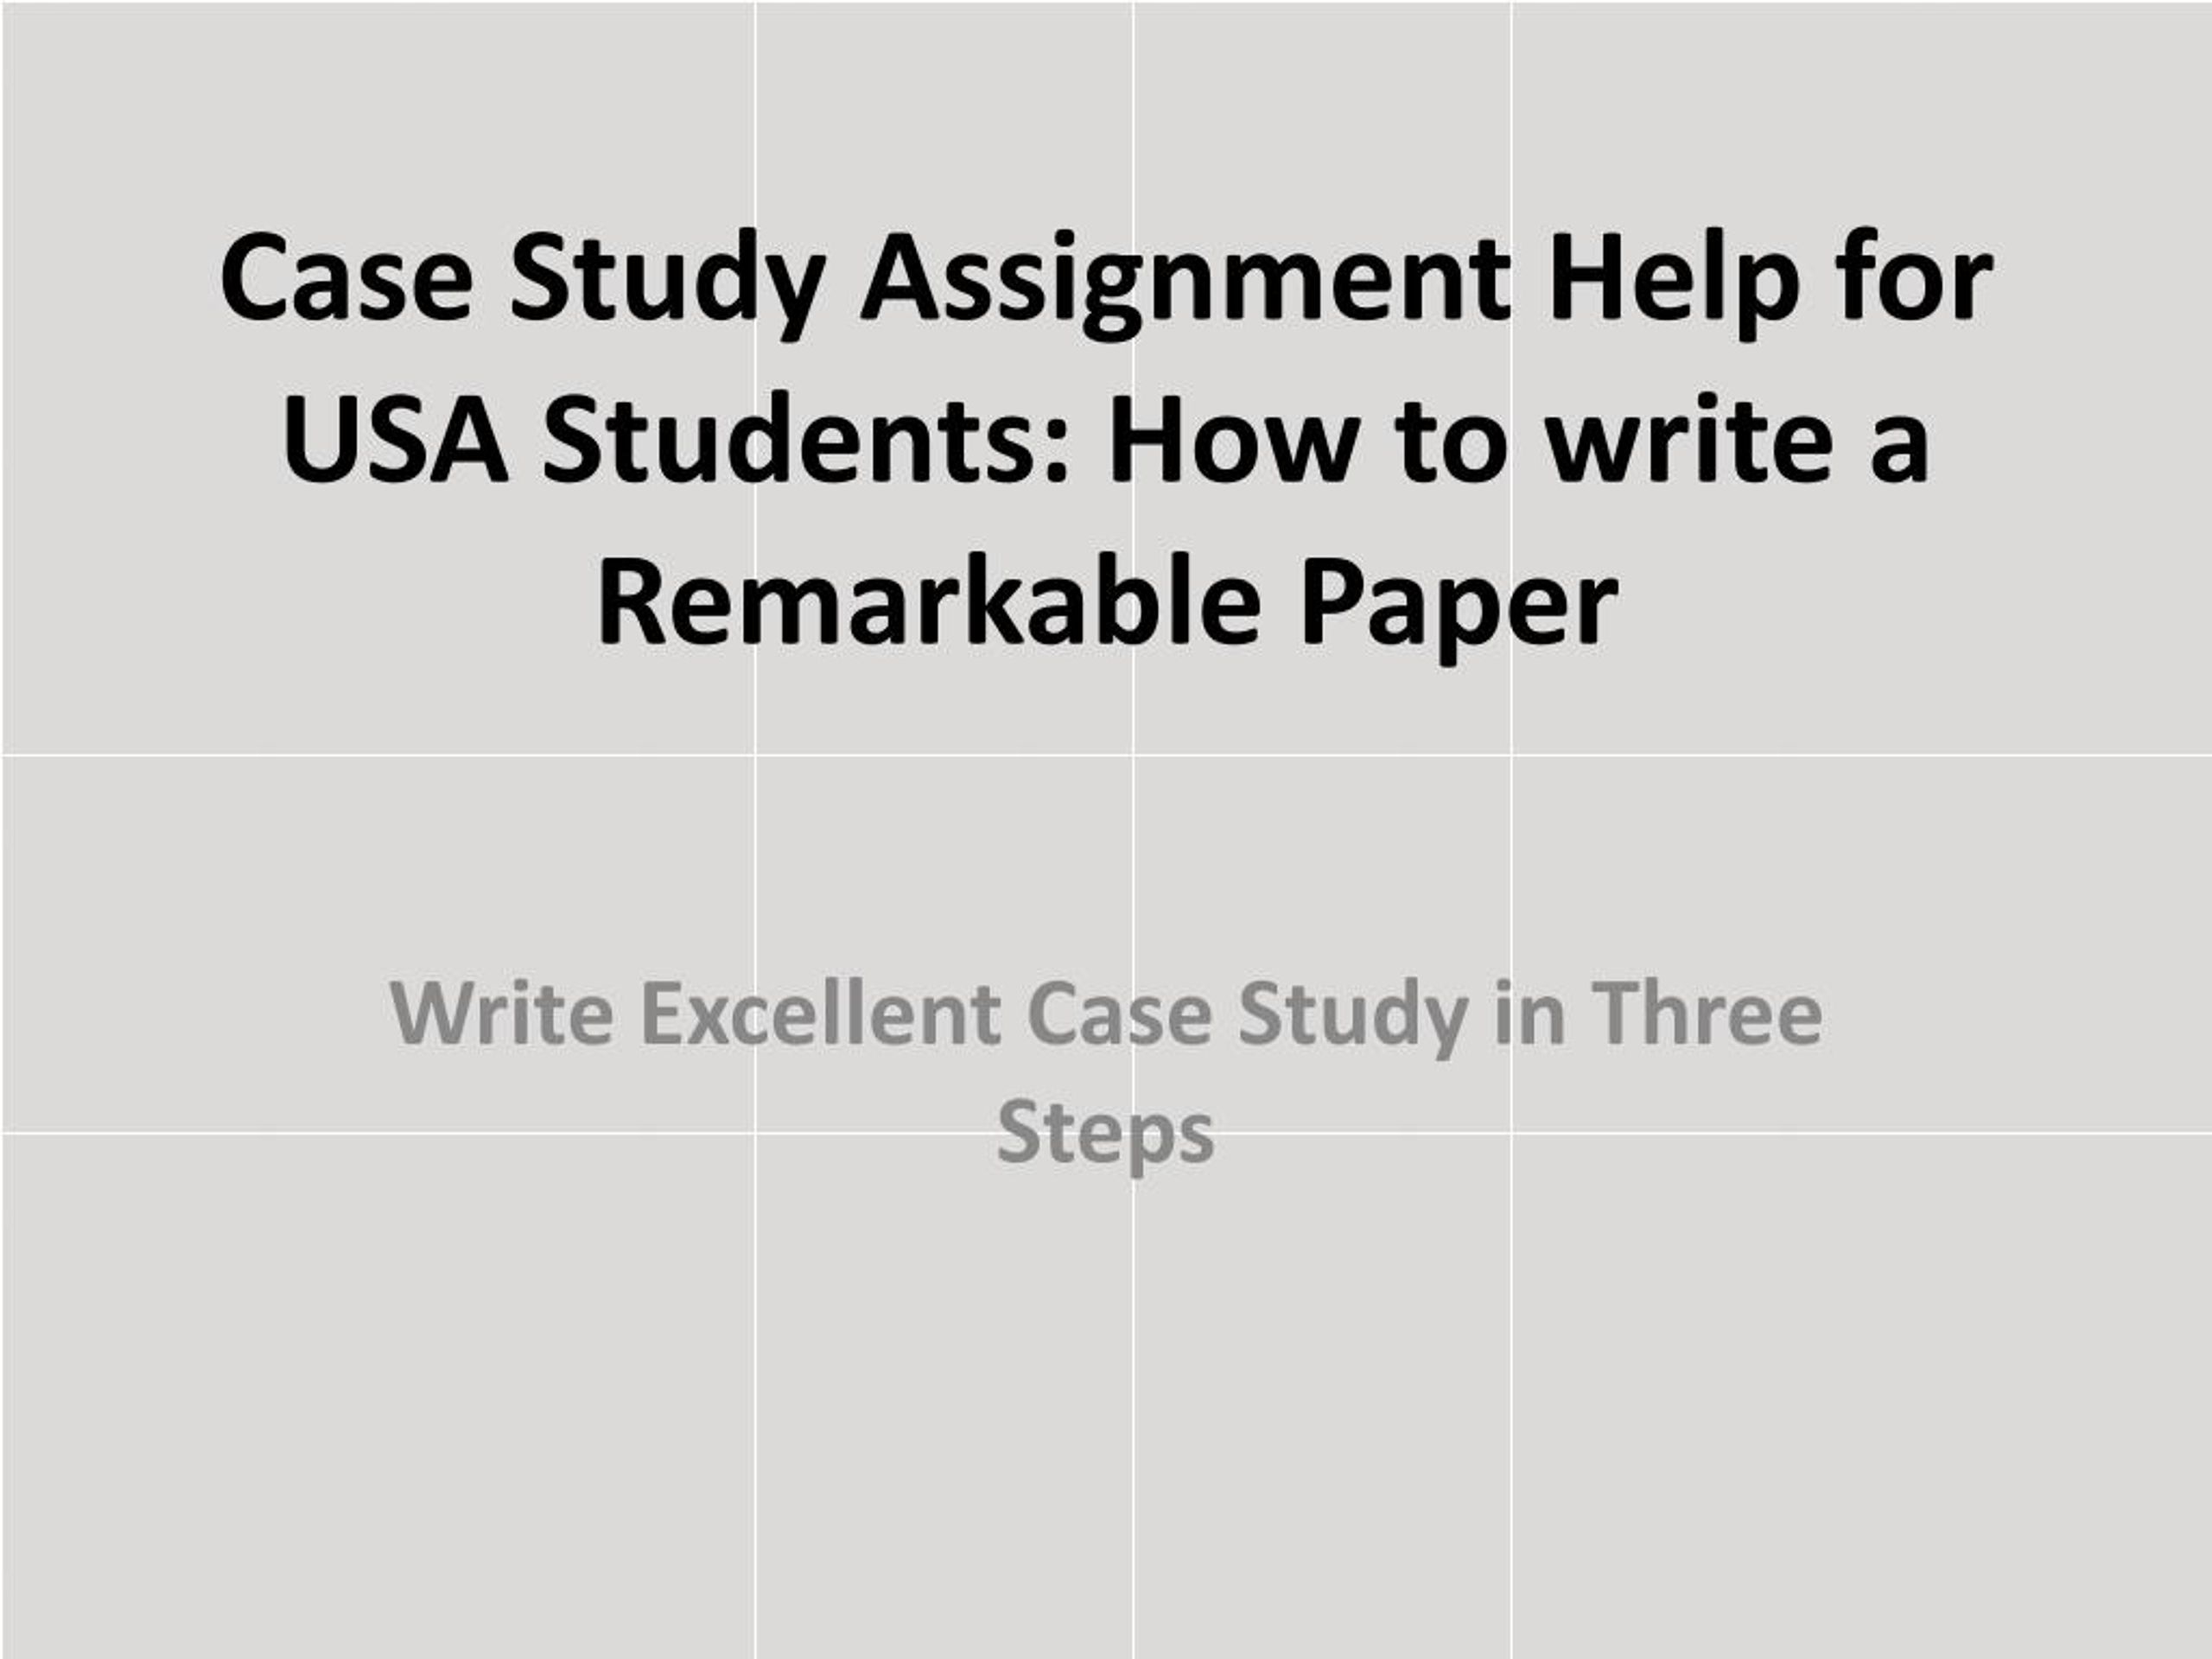 PPT - Case Study Assignment Help for USA Students: How to write a